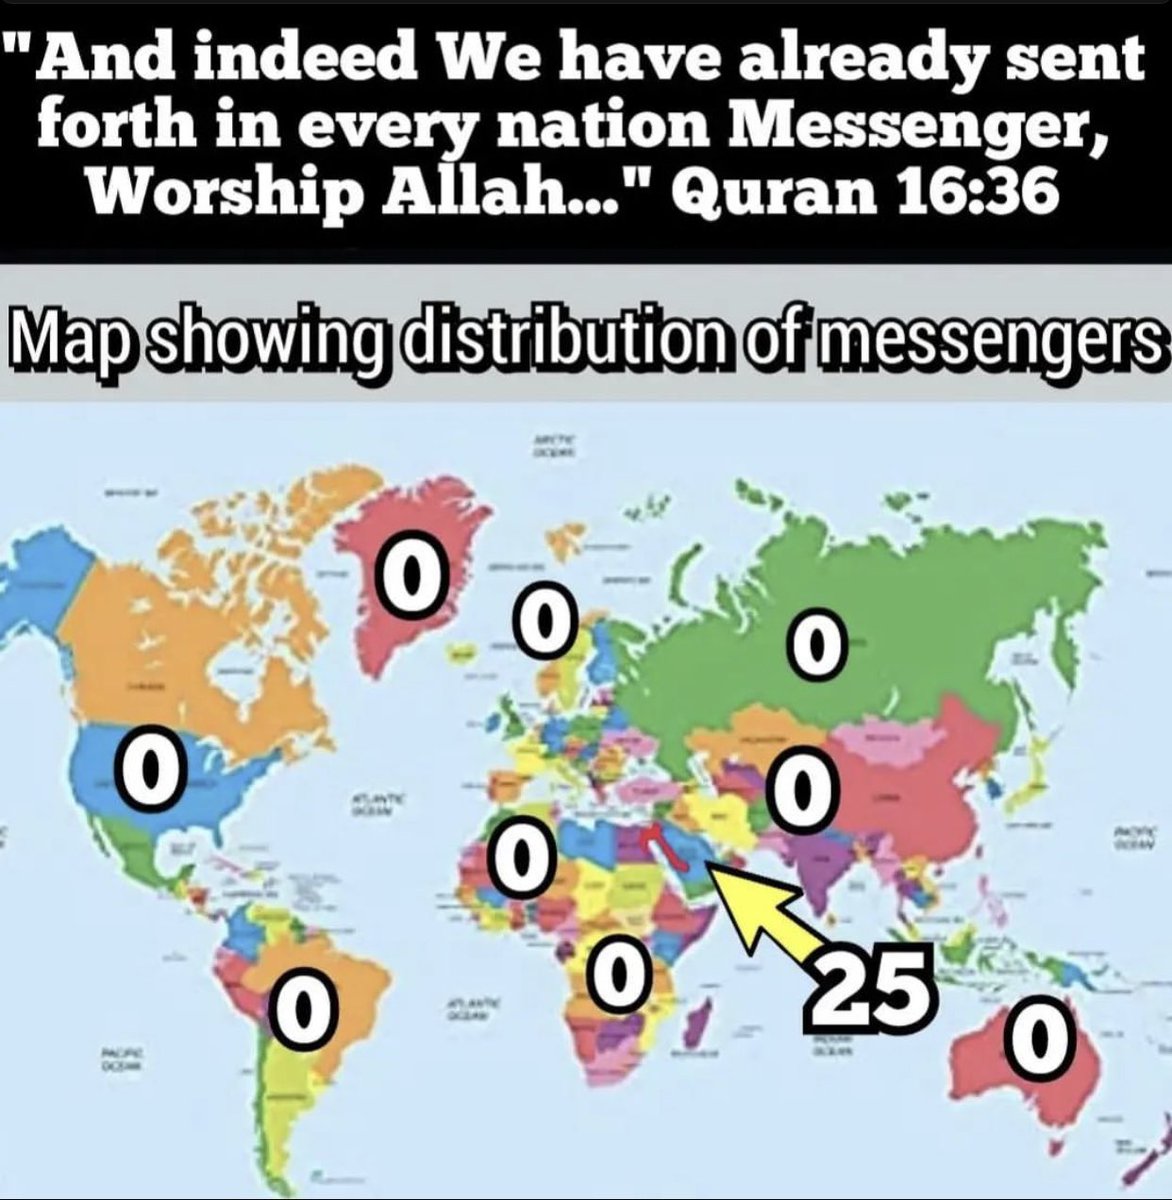 In the Quran, we are told that Allah sent a messenger to every nation. Yes, the term is very clear 'every nation'. The Quran mentions some 25 prophets/messengers. It gets worse, as some claim 124,000 messengers. #islam #Apostasy #ExMuslim